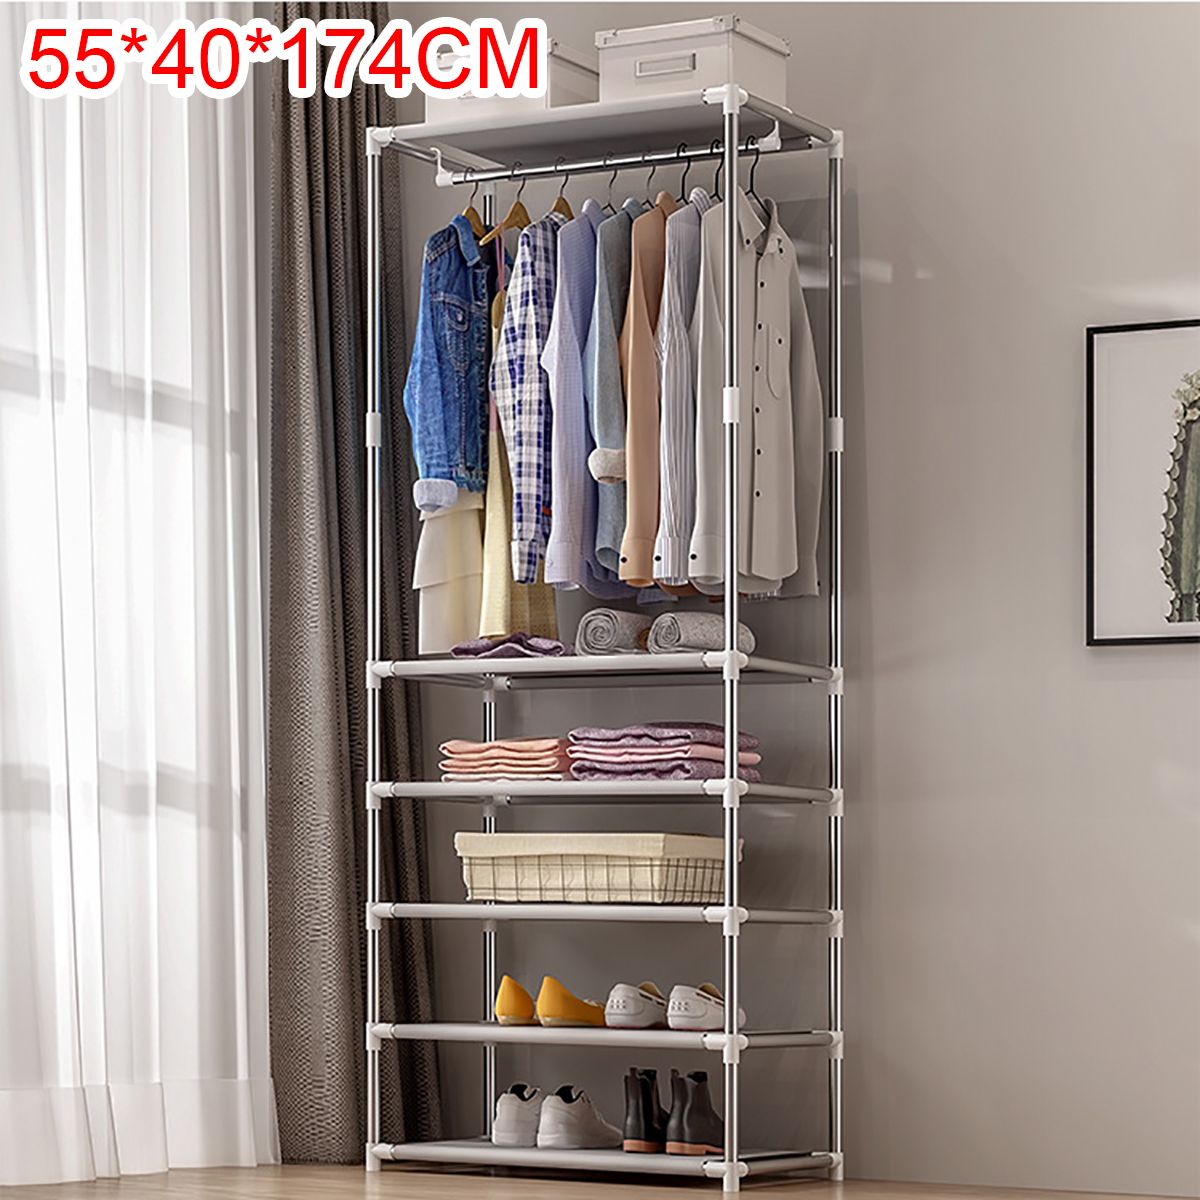 Simple Coat Rack Floor Clothes Hangers Creative Clothing Rack Shelf Easy Assembly Bedroom Hanging Clothing Racks Fashion Home Decorations 9